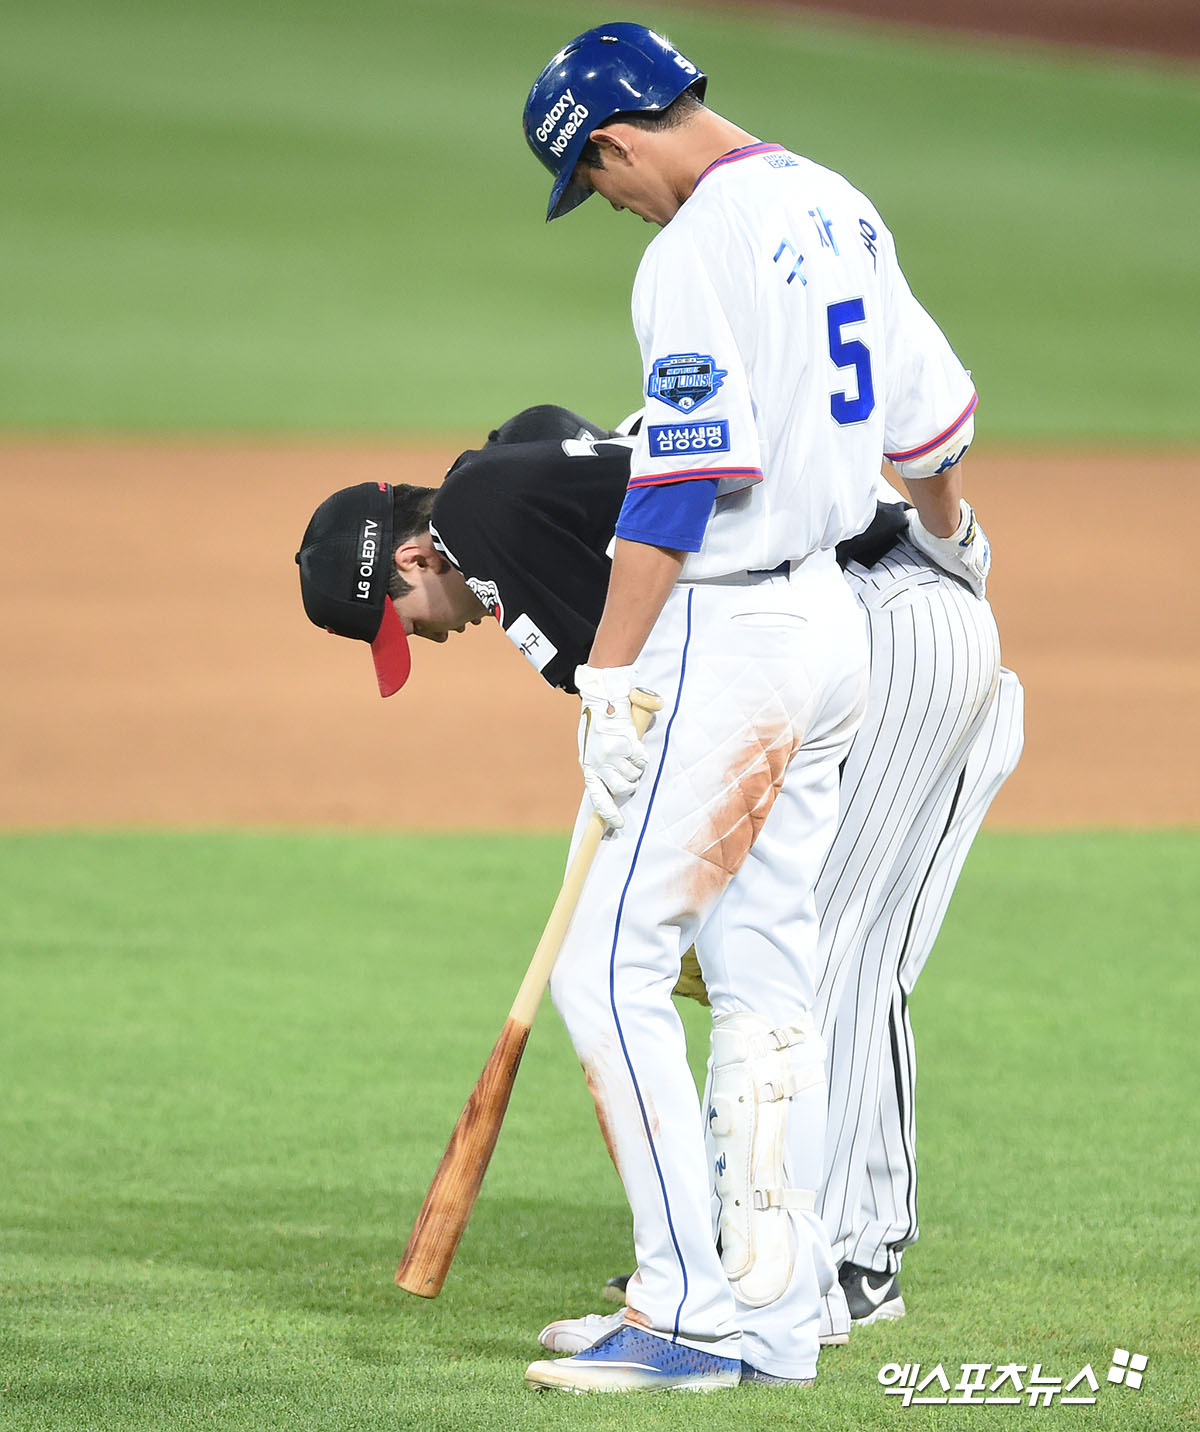 The 2020 Shinhan Bank SOL KBO League match between the LG Twins and the Samsung Lions Lions at the Deagu Samsung Lions Lions Park on the afternoon of the 26th, and the first Samsung Lions Koo Ja-wook in the second inning, are approaching LG Lee Min-ho, who is suffering after being out of the pitcher line drive.